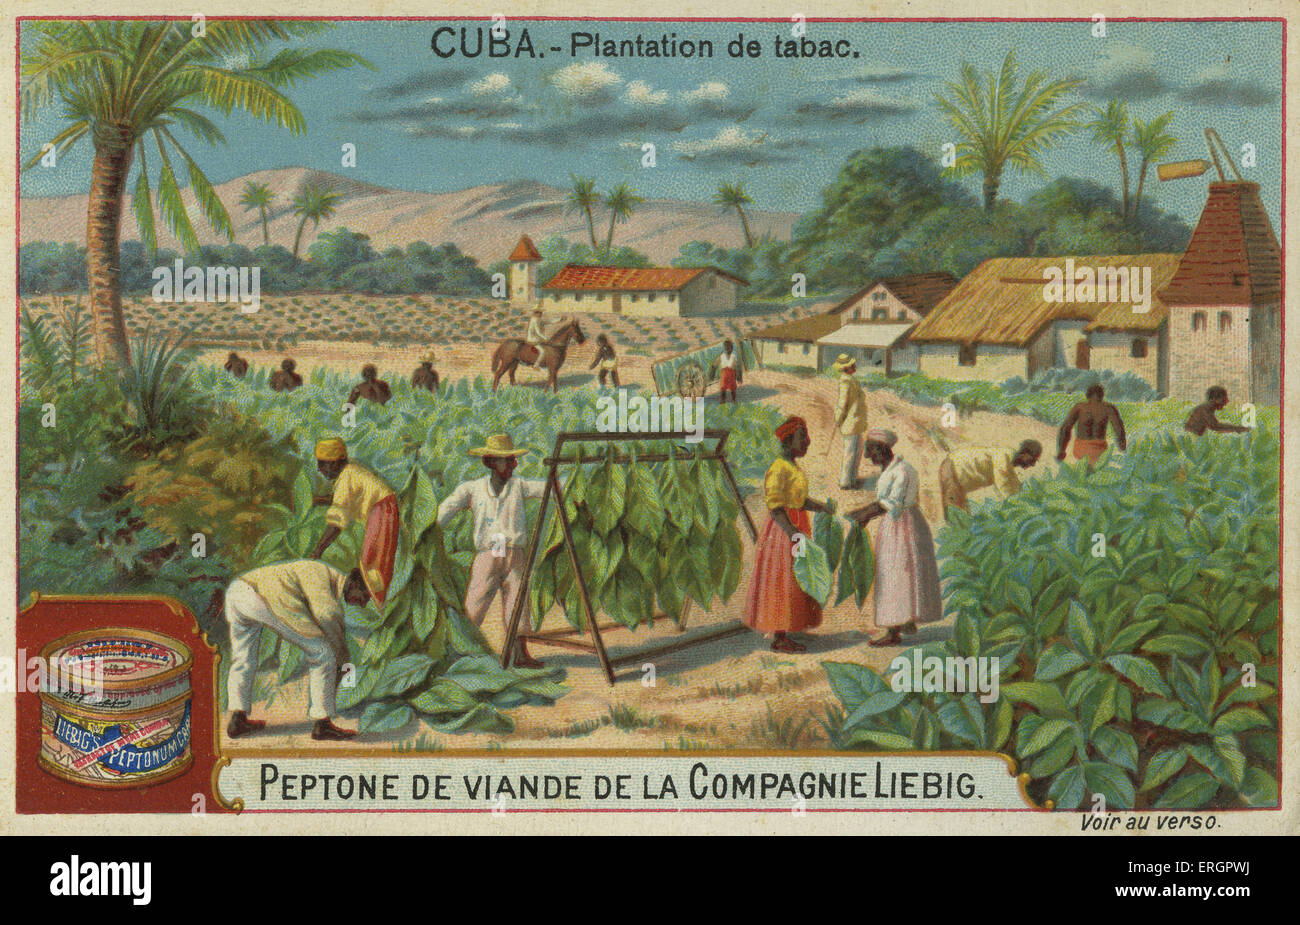 Tobacco plantation, Cuba, 19th century. Workers in the fields collect tobacco leaves and hang them up to dry out. From a recipe Stock Photo